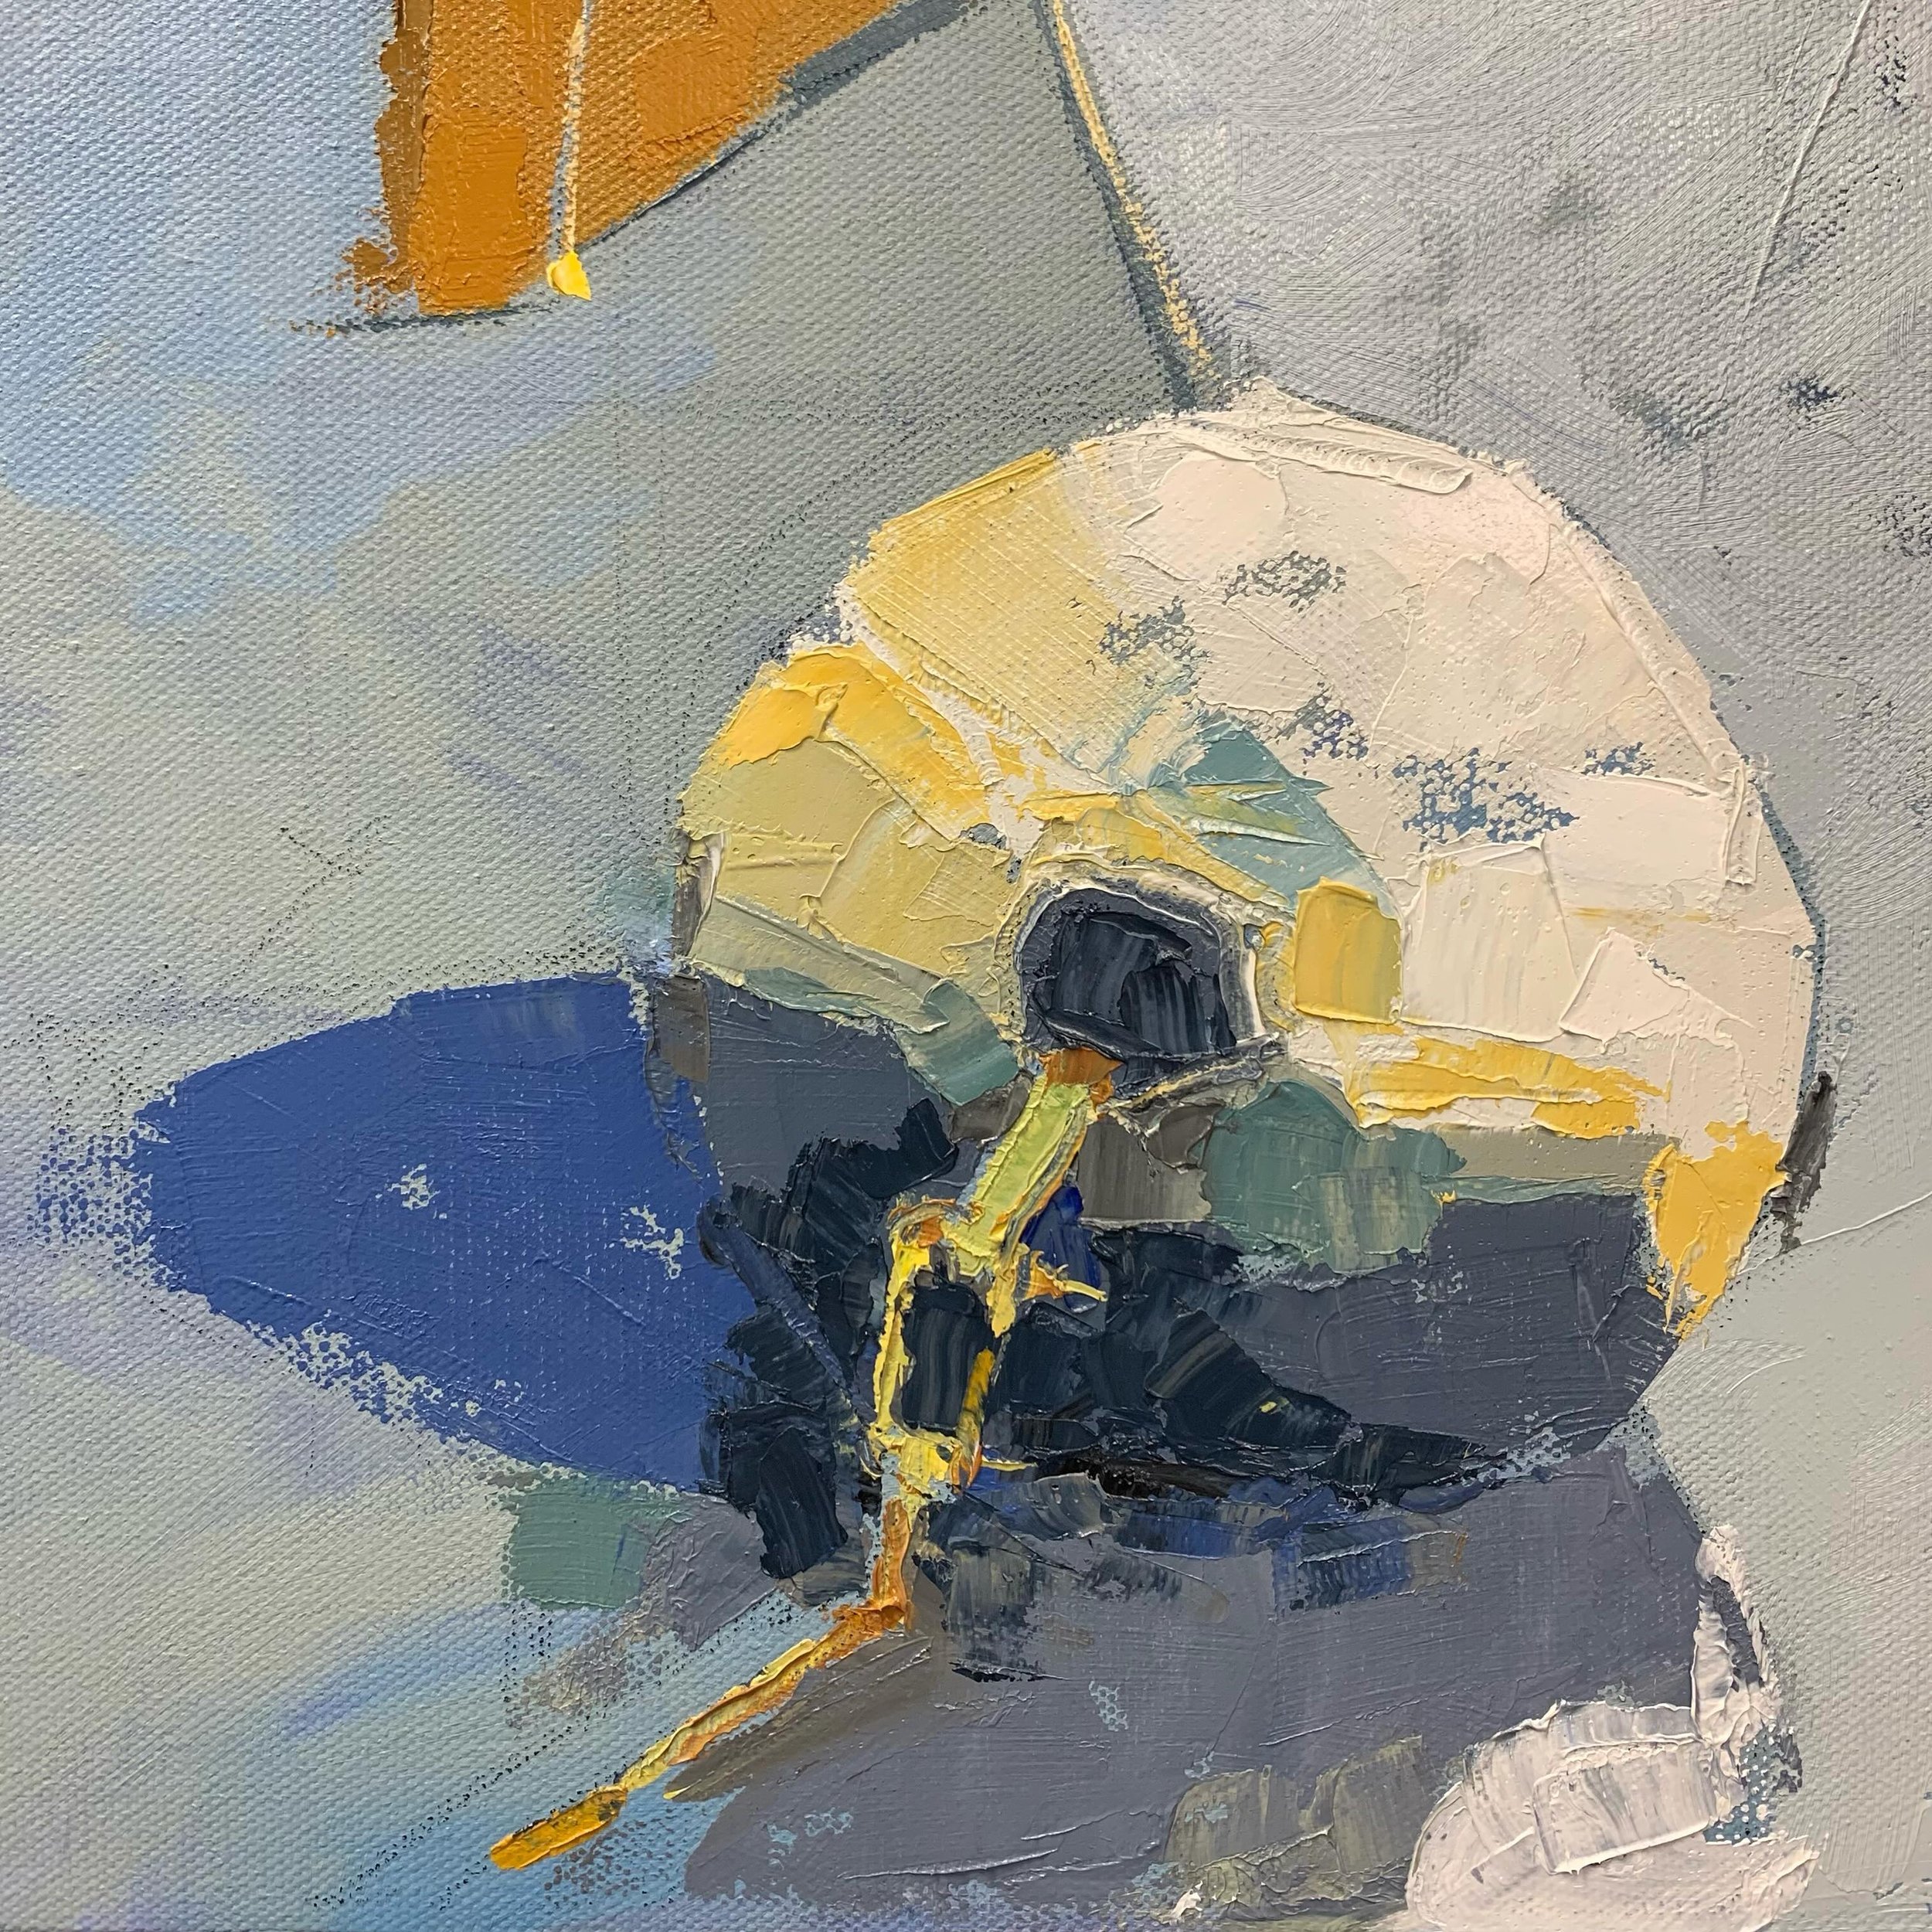 Palette knife detail. I&rsquo;m doing an in-person demo on palette knife painting at @slowriverstudio in Topsfield MA on the evening of April 30th. Join us!
#paletteknifepainting #paletteknife #oilpaint #lowtide #boatlifestyle #studioprocess #landsca